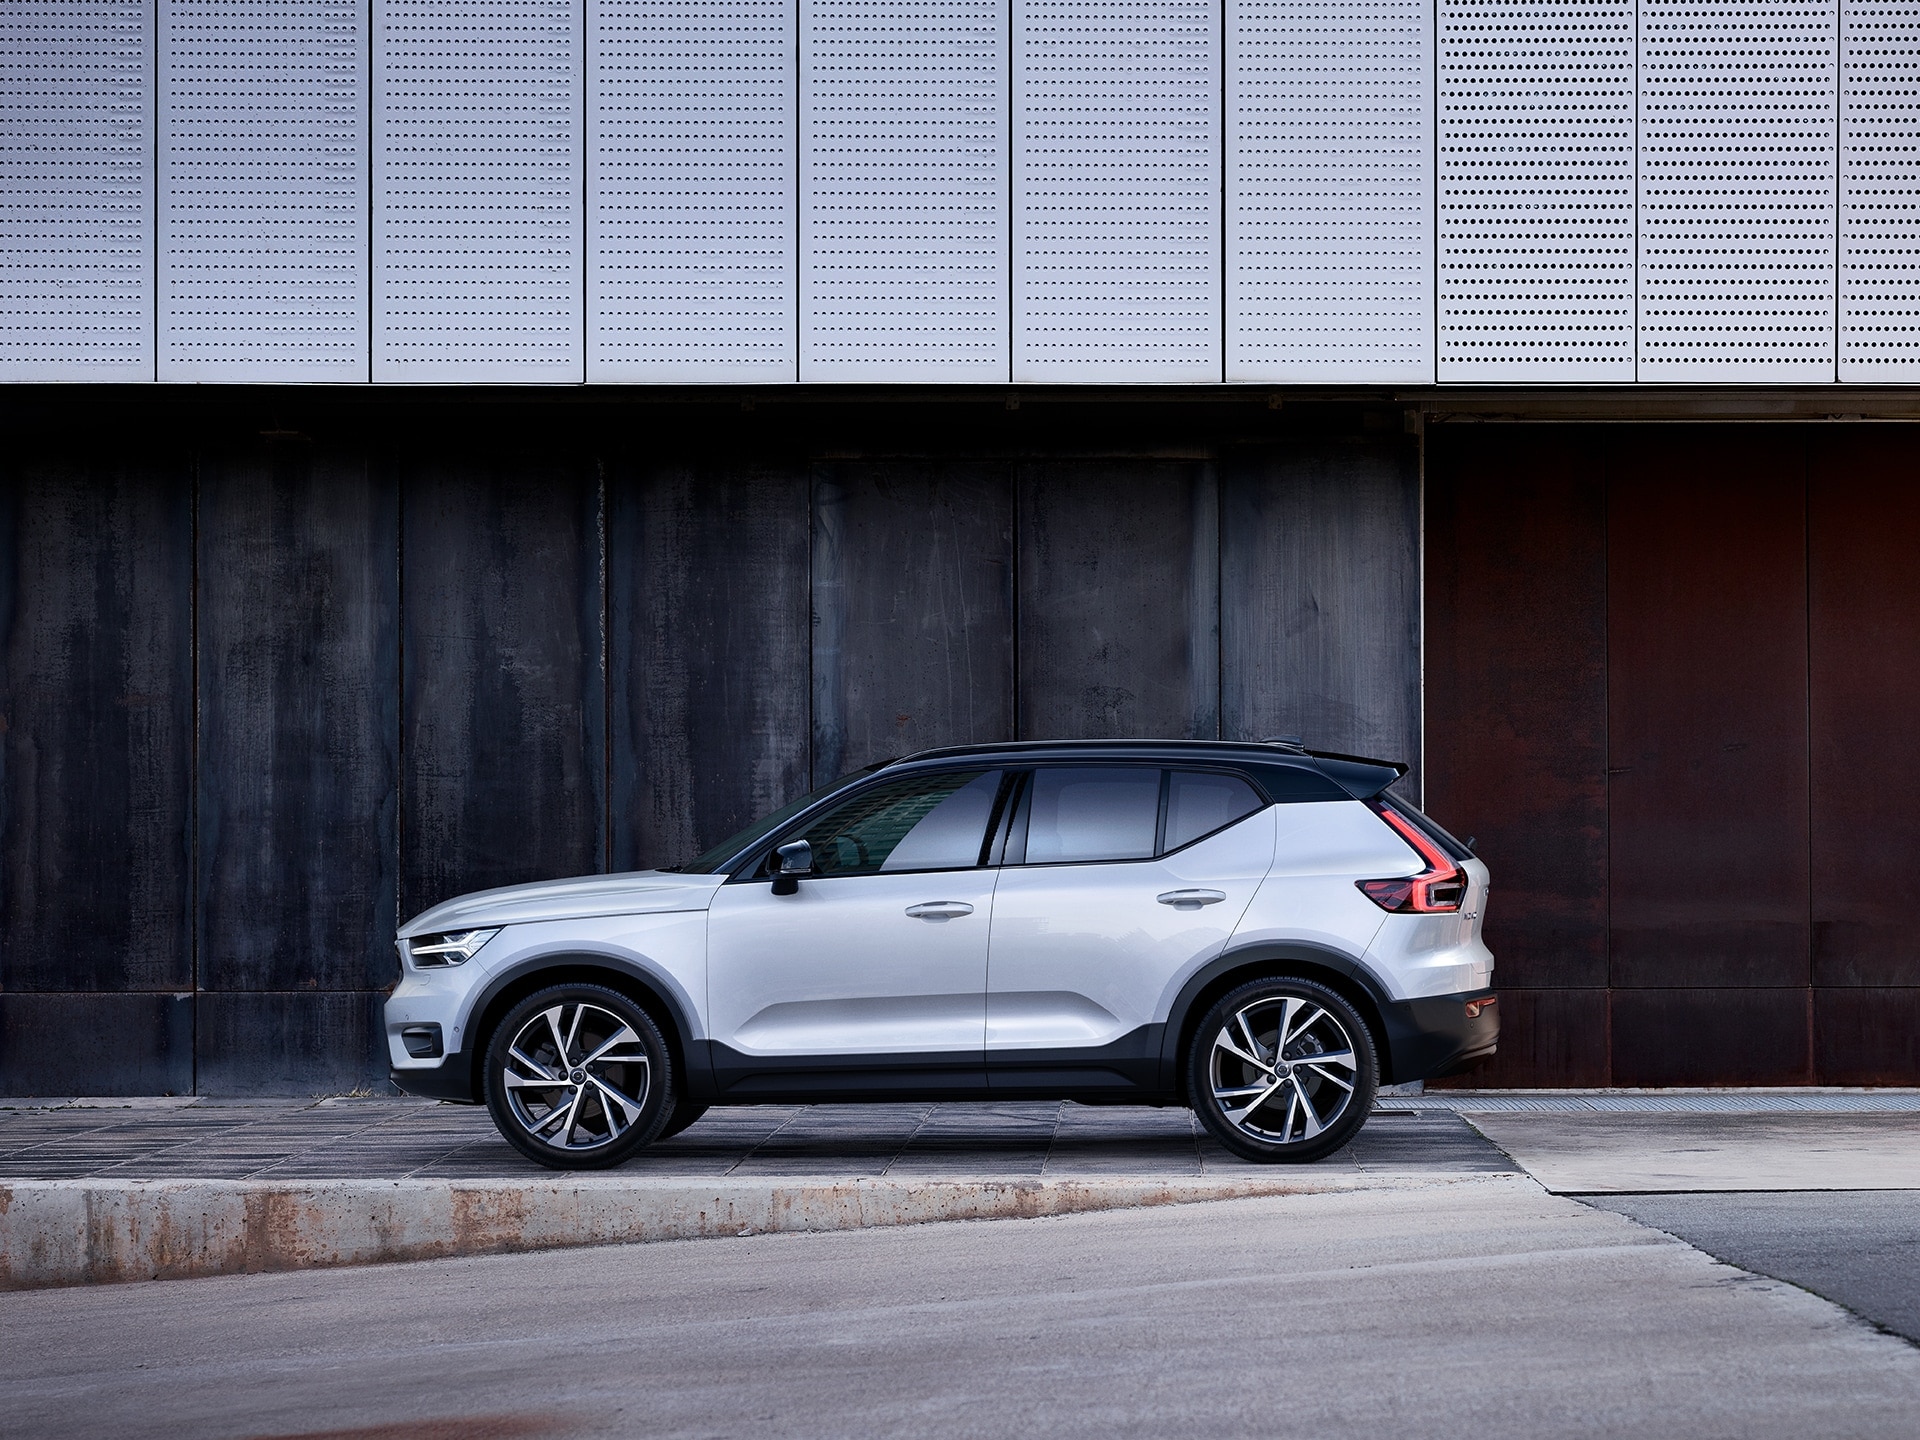 The side profile of a silver Volvo XC40 SUV.